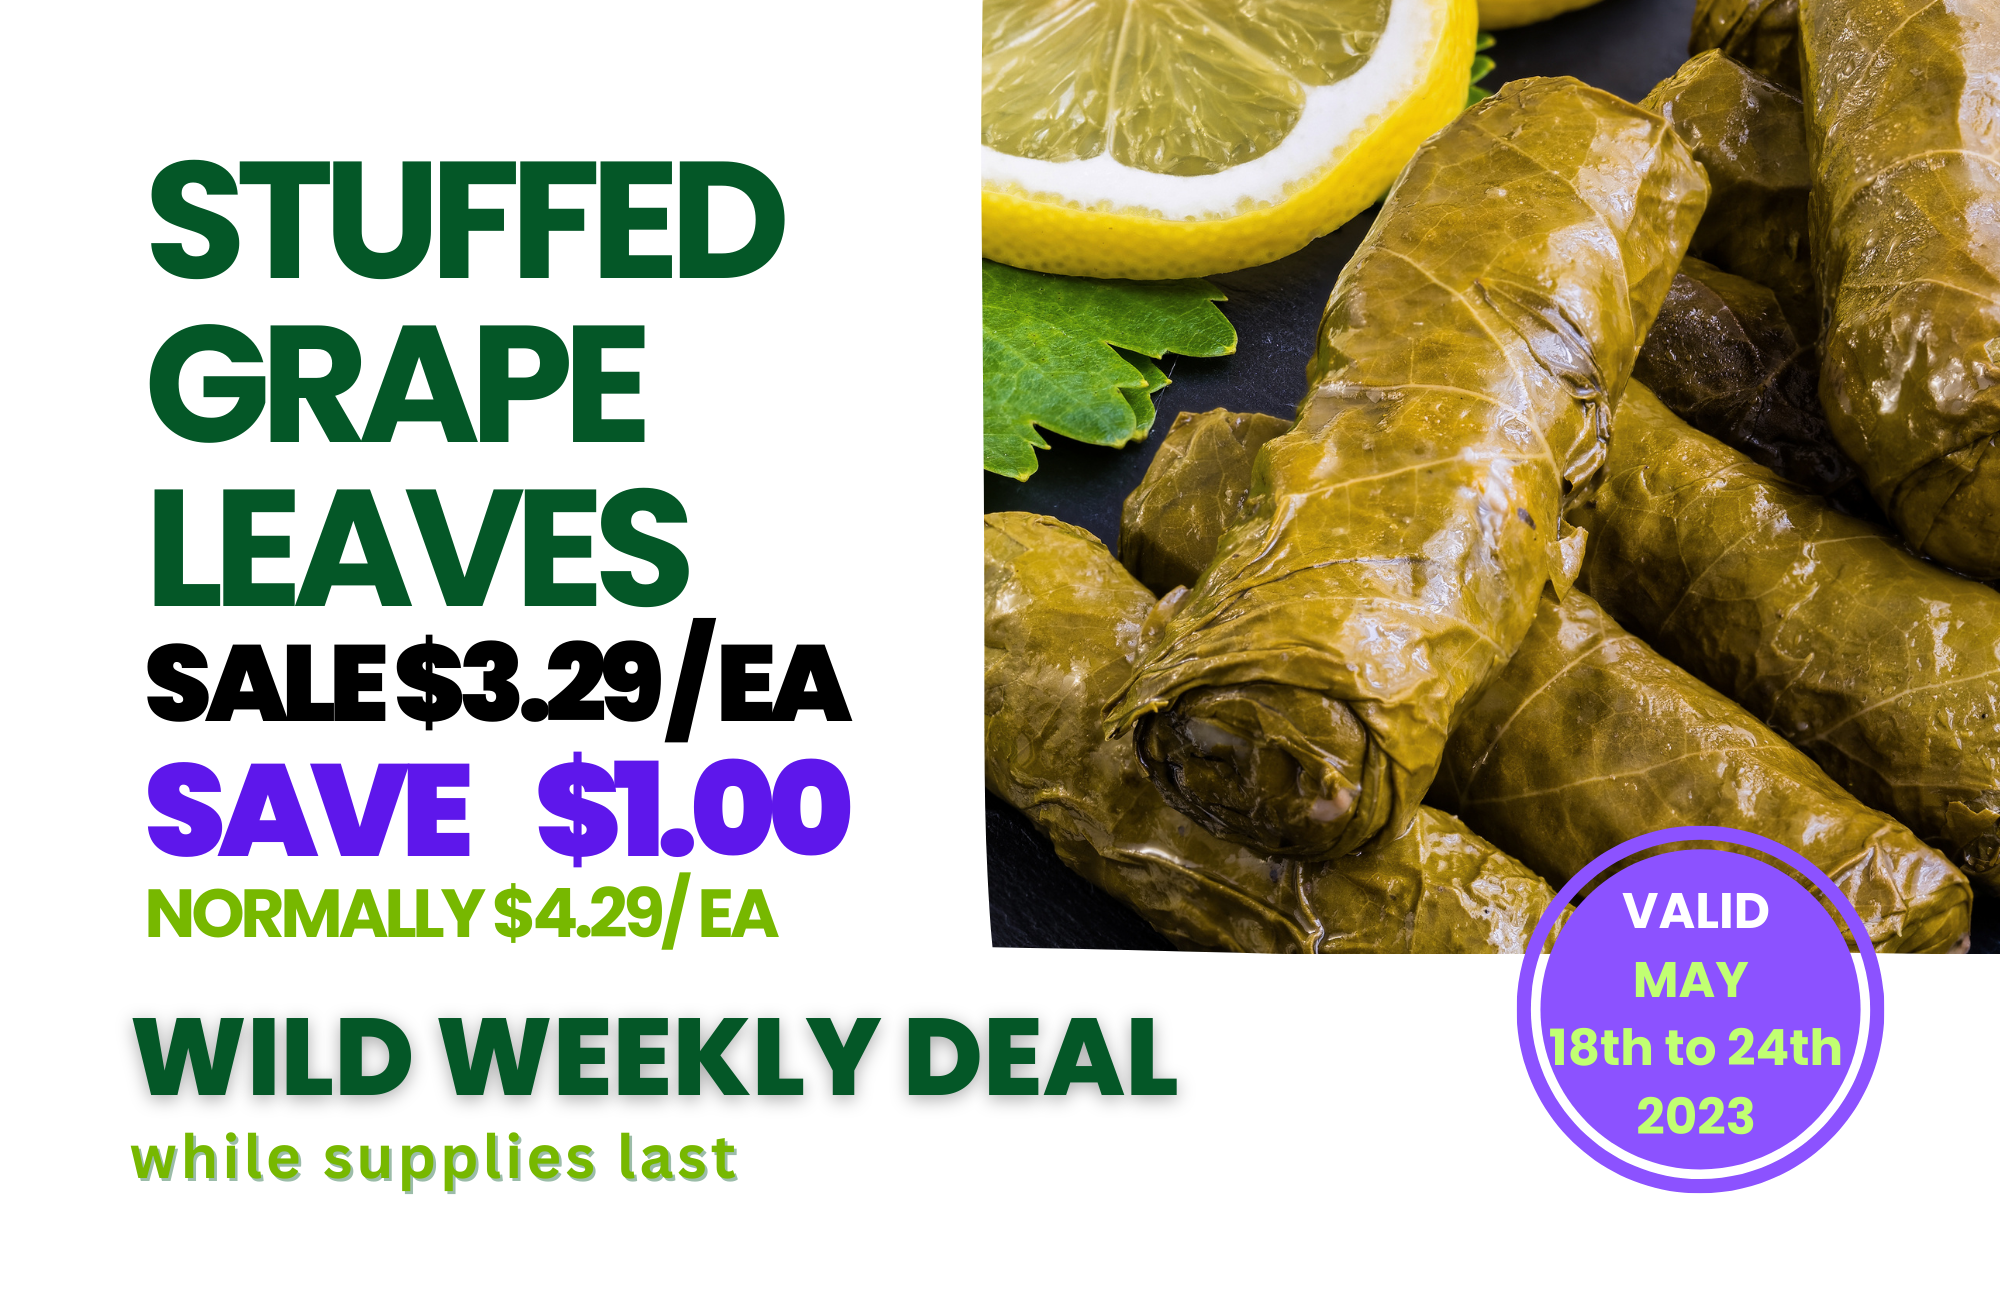 Wild Oats Market Williamstown MA Weekly Deals May 18-24 2023 Stuffed Grape Leaves.png